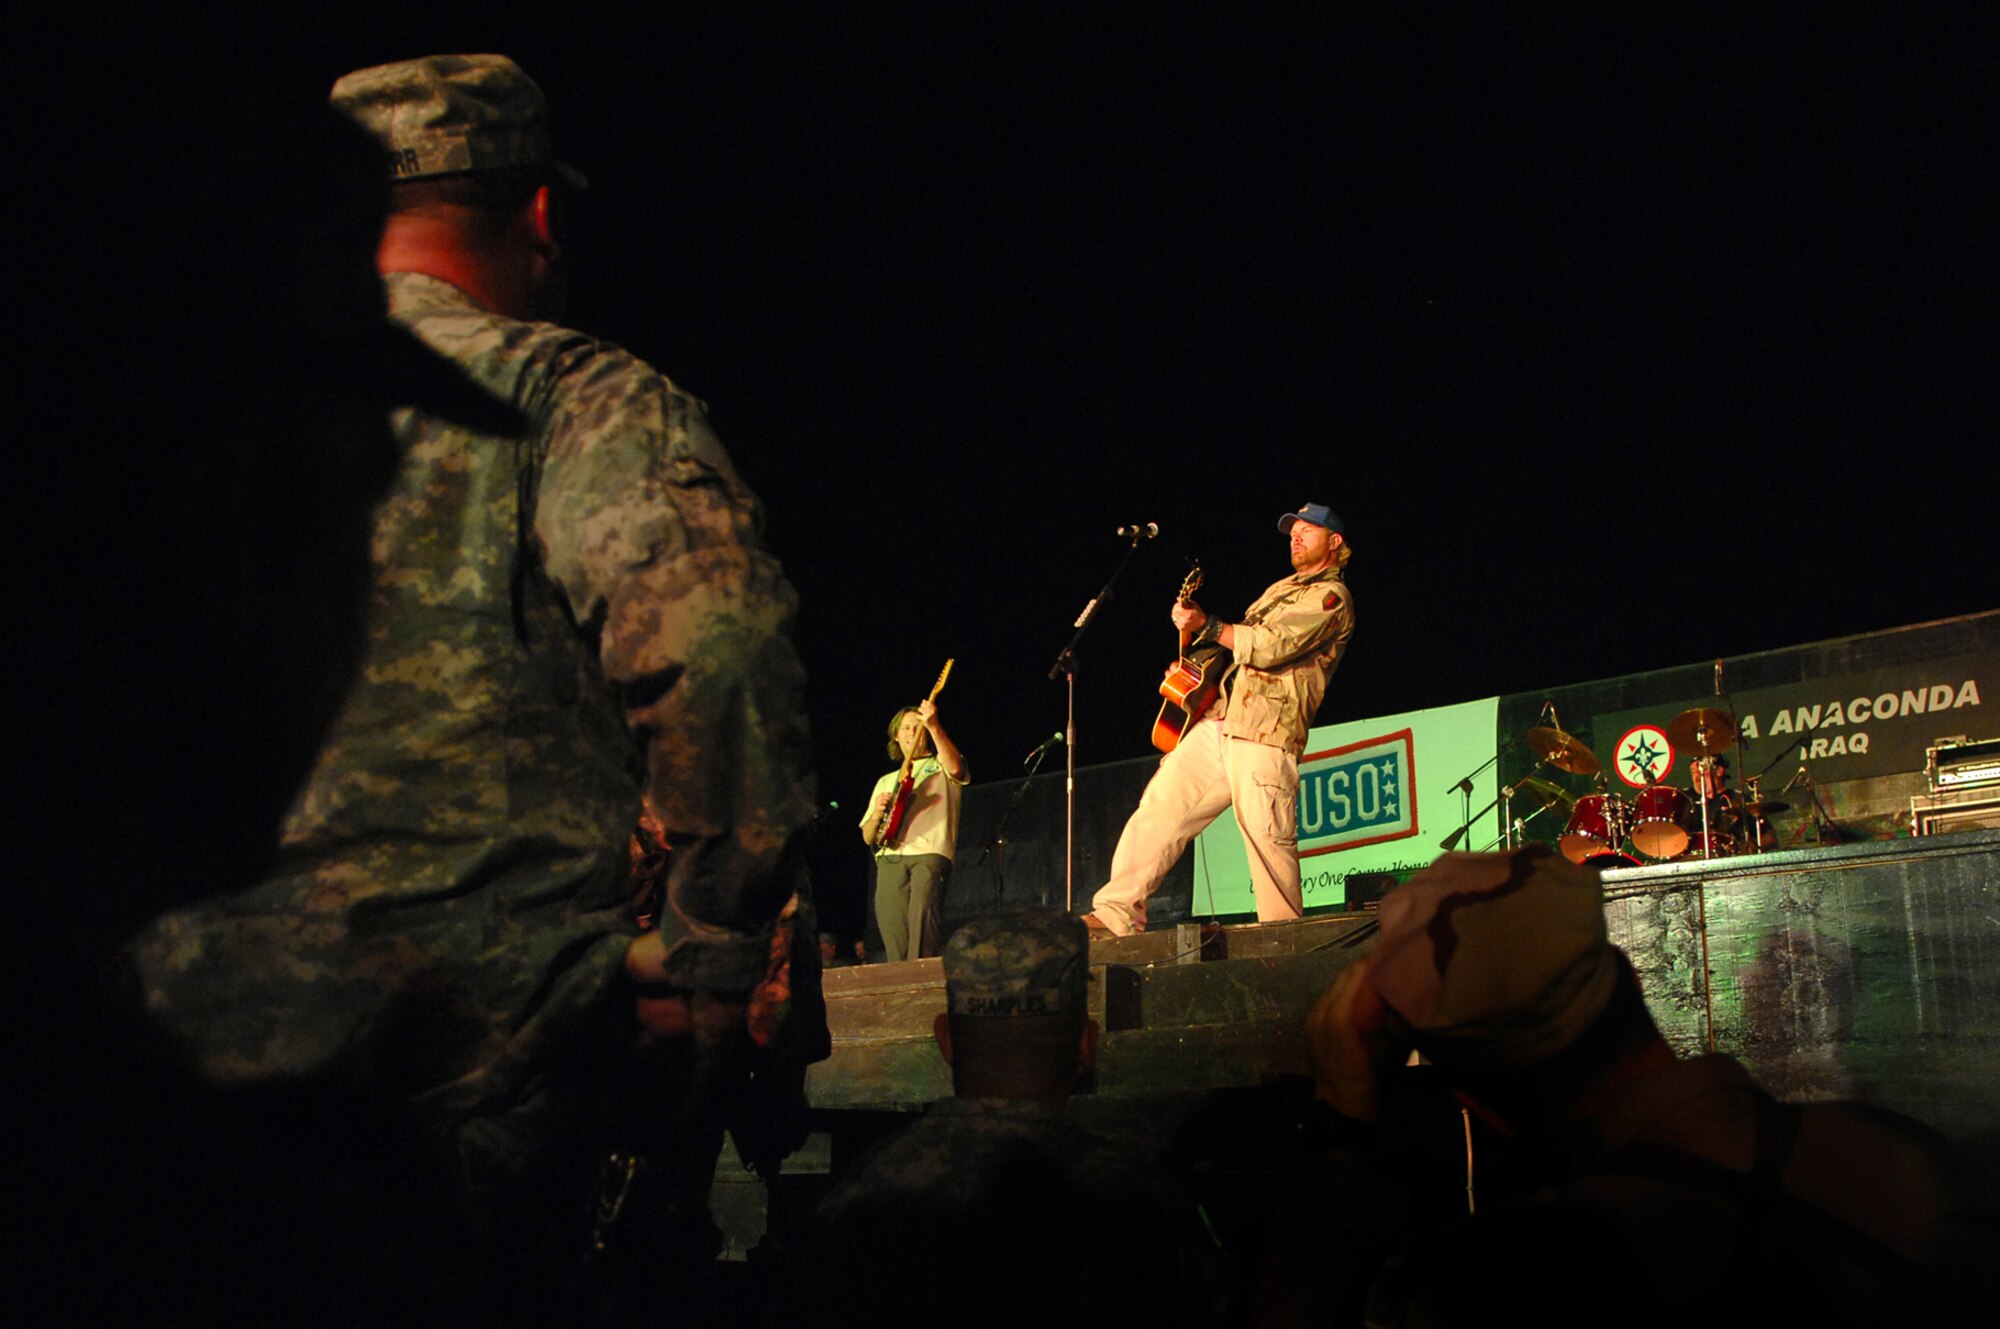 BALAD AIR BASE, Iraq -- Country music superstar Toby Keith sings to a crowd of more than 5,000 servicemembers here, April 28. Mr. Keith told those in attendance that he was proud of their service and thankful for their efforts in fighting terrorists and keeping America free. He referred to military members as "warriors" and was present for the re-enlistments of five Soldiers stationed at Logistics Support Agency Anaconda, which is co-located with Balad. Mr. Keith is wrapping up his sixth USO tour in Iraq; his show at Balad marked his 117th show in the Area of Responsibility. (U.S. Air Force photo/ Senior Airman Julianne Showalter)